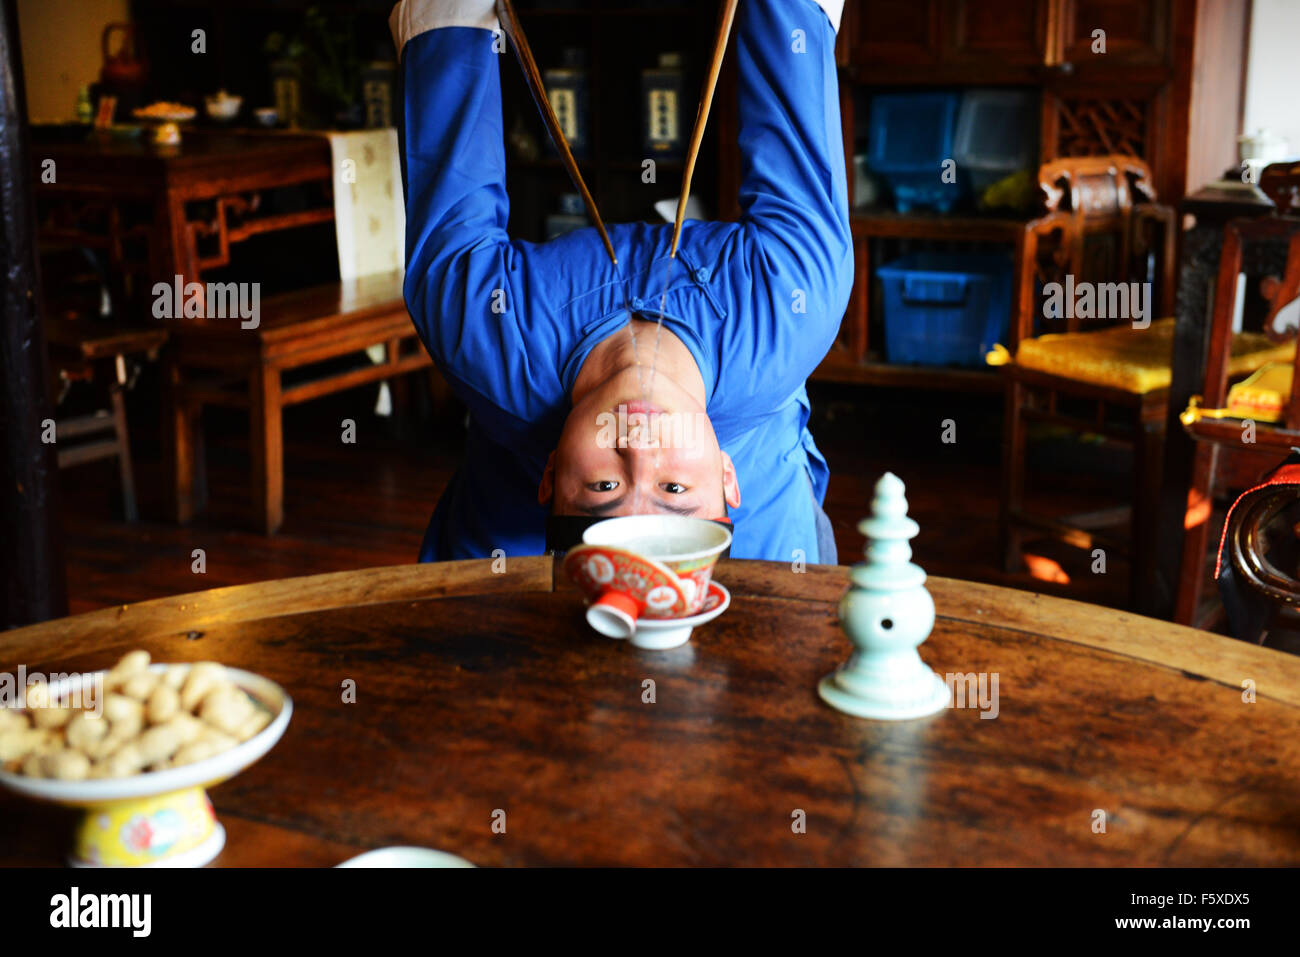 https://c8.alamy.com/comp/F5XDX5/pouring-hot-water-for-tea-in-a-traditional-acrobatic-way-F5XDX5.jpg